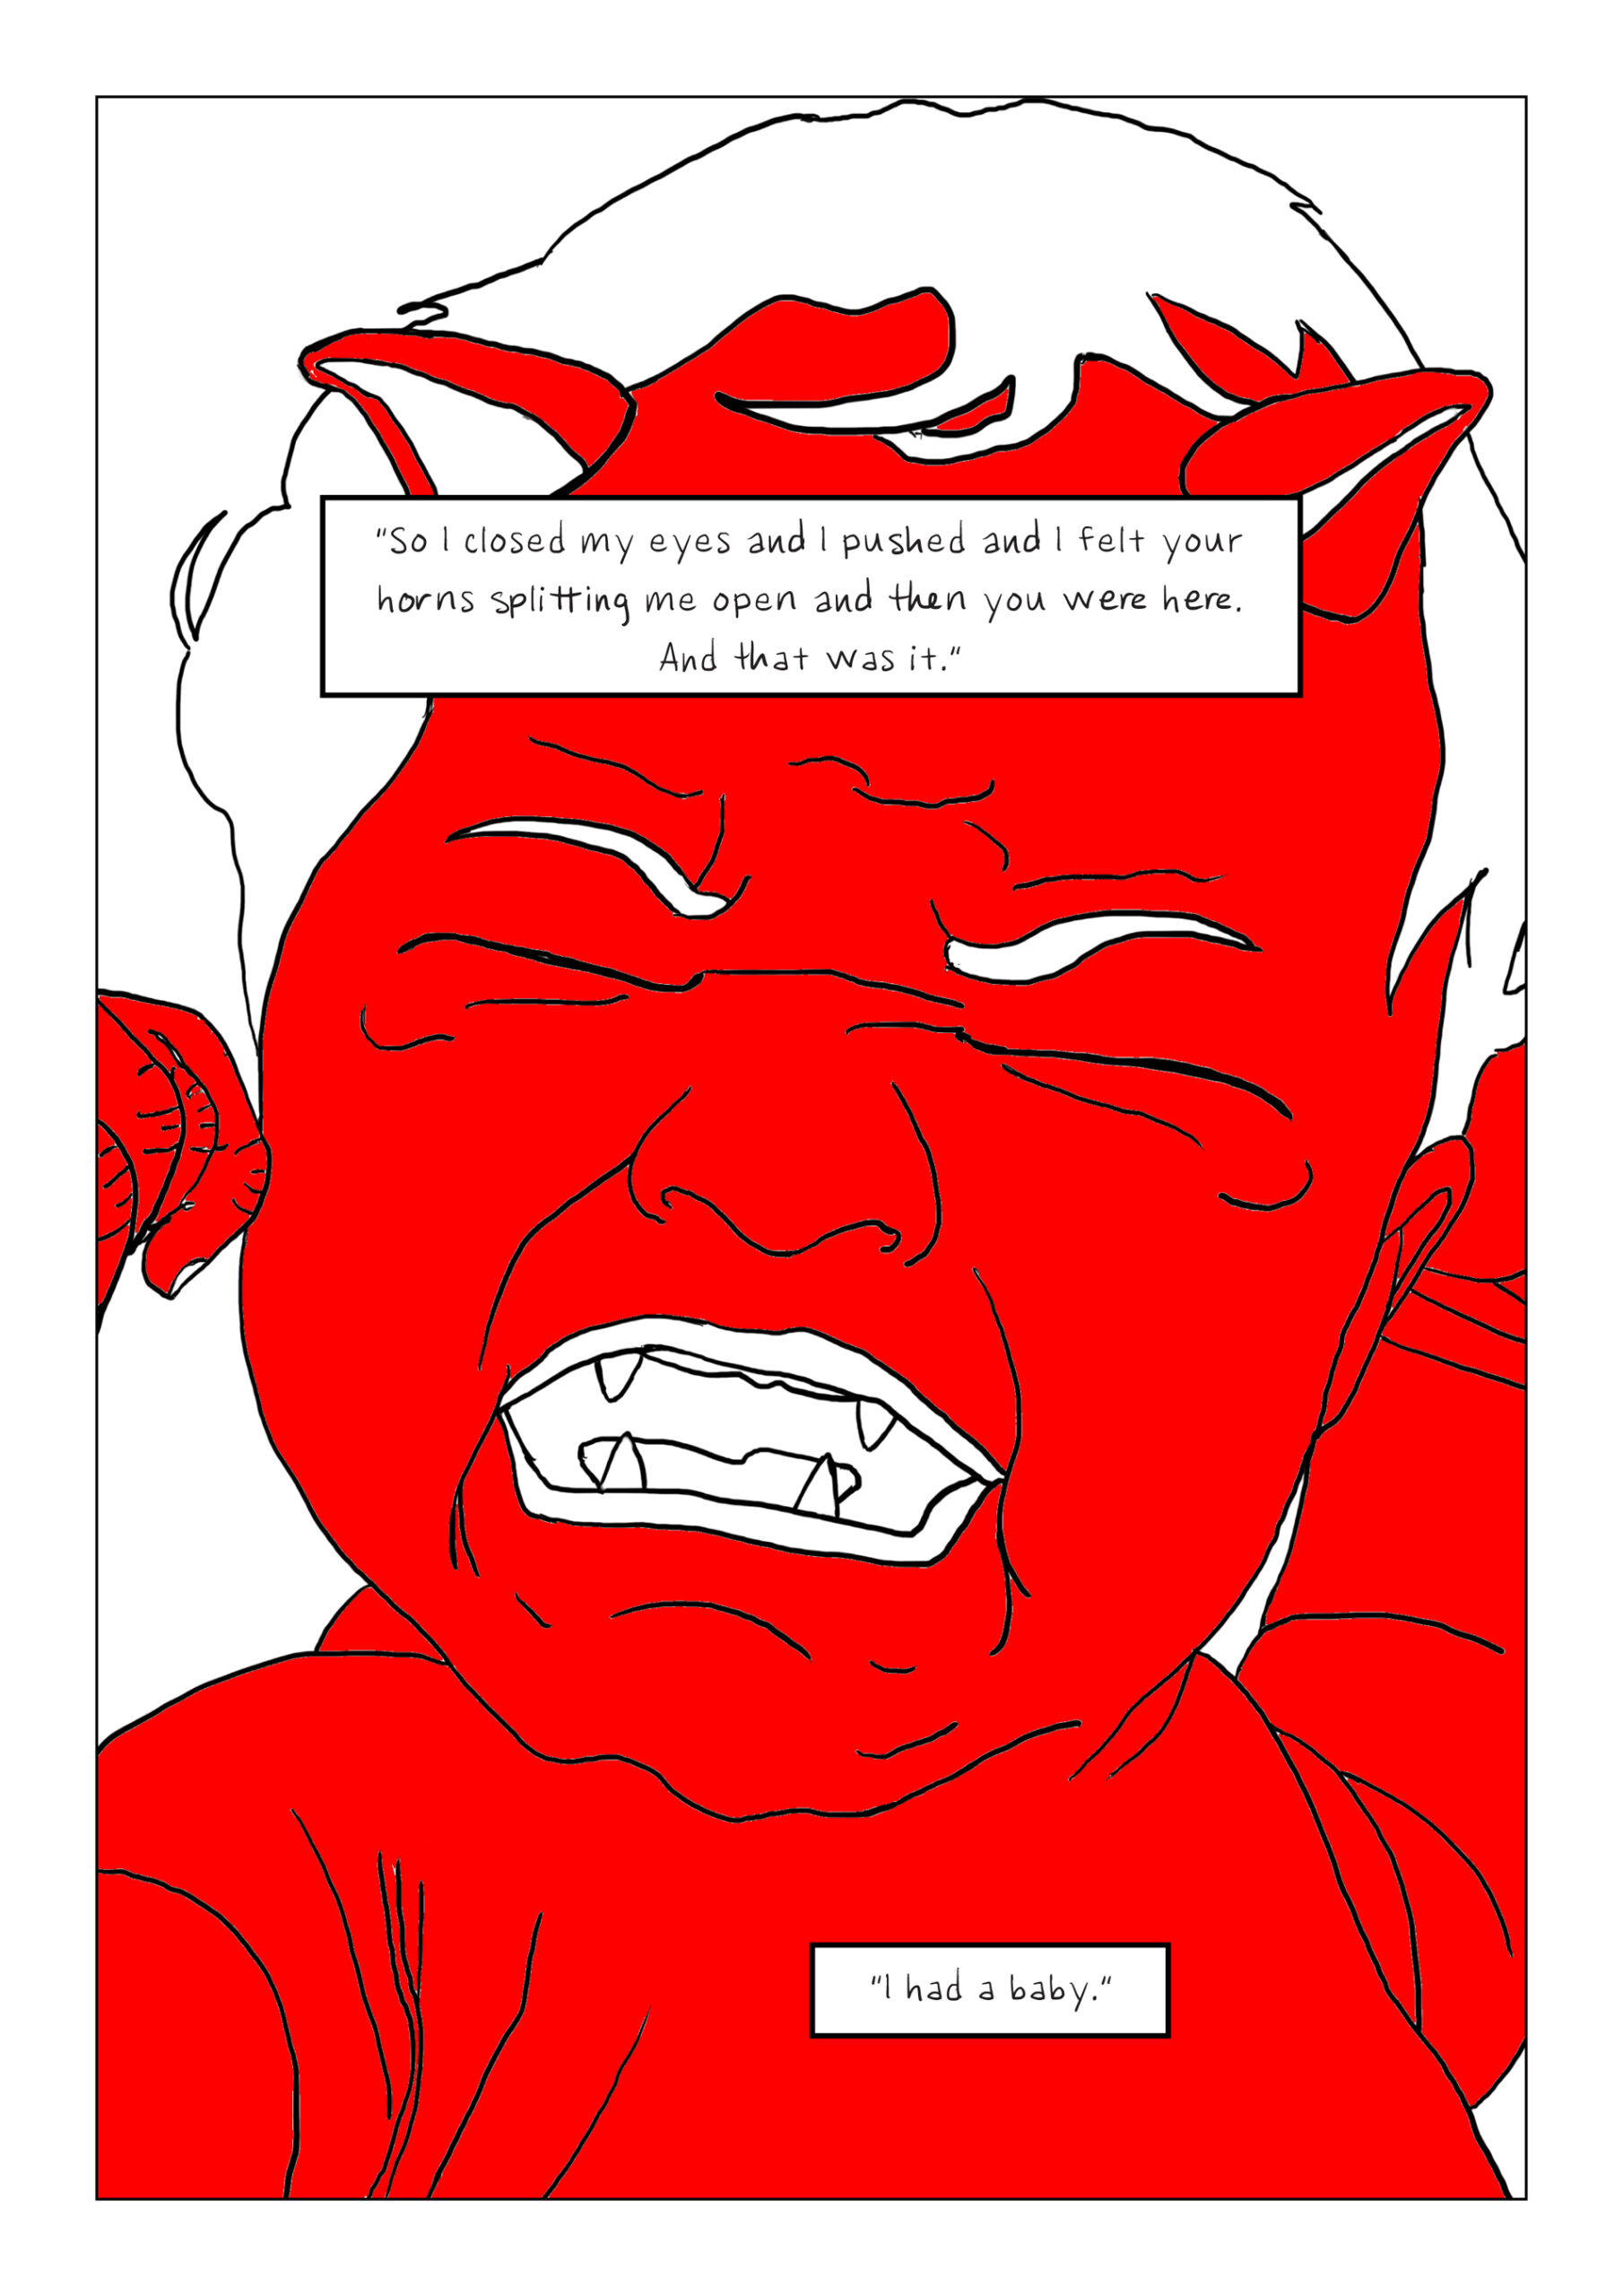 Close-up on a crying newborn infant. The baby's skin is bright red and they have horns and fangs. Text: “So I closed my eyes and I pushed and I felt your horns splitting me open and then you were here. And that was it. I had a baby.”